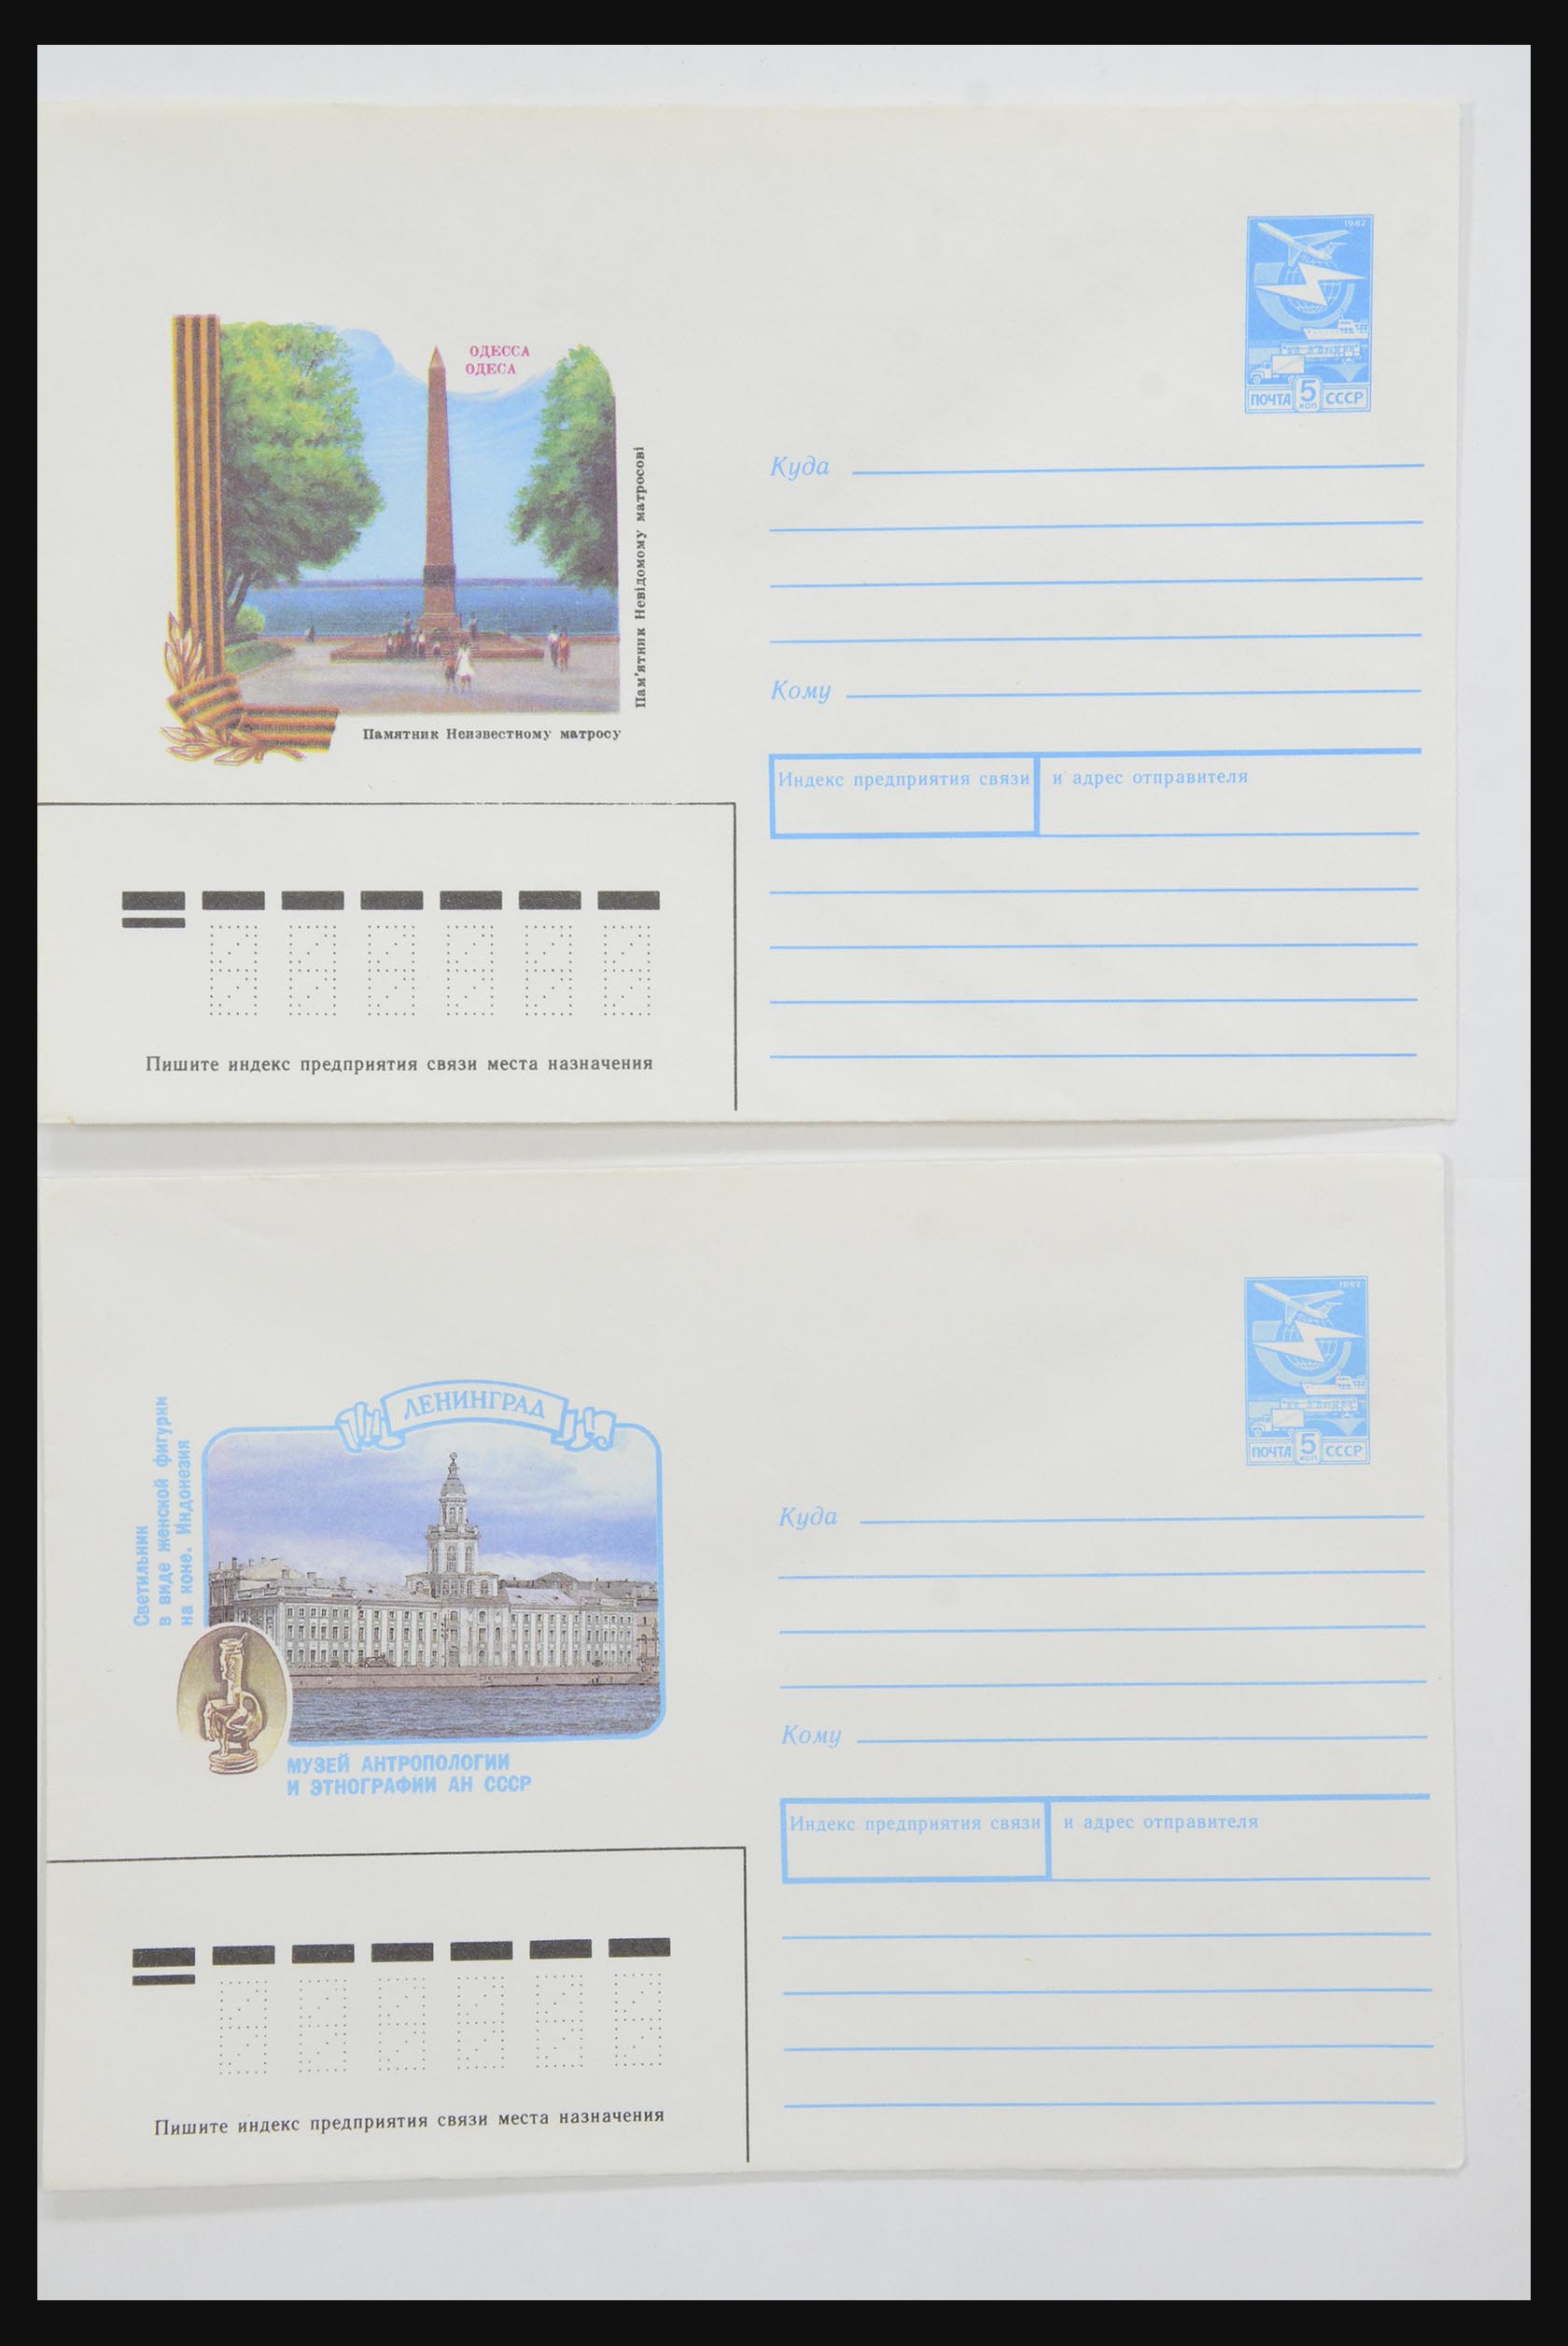 31928 0048 - 31928 Eastern Europe covers 1960's-1990's.